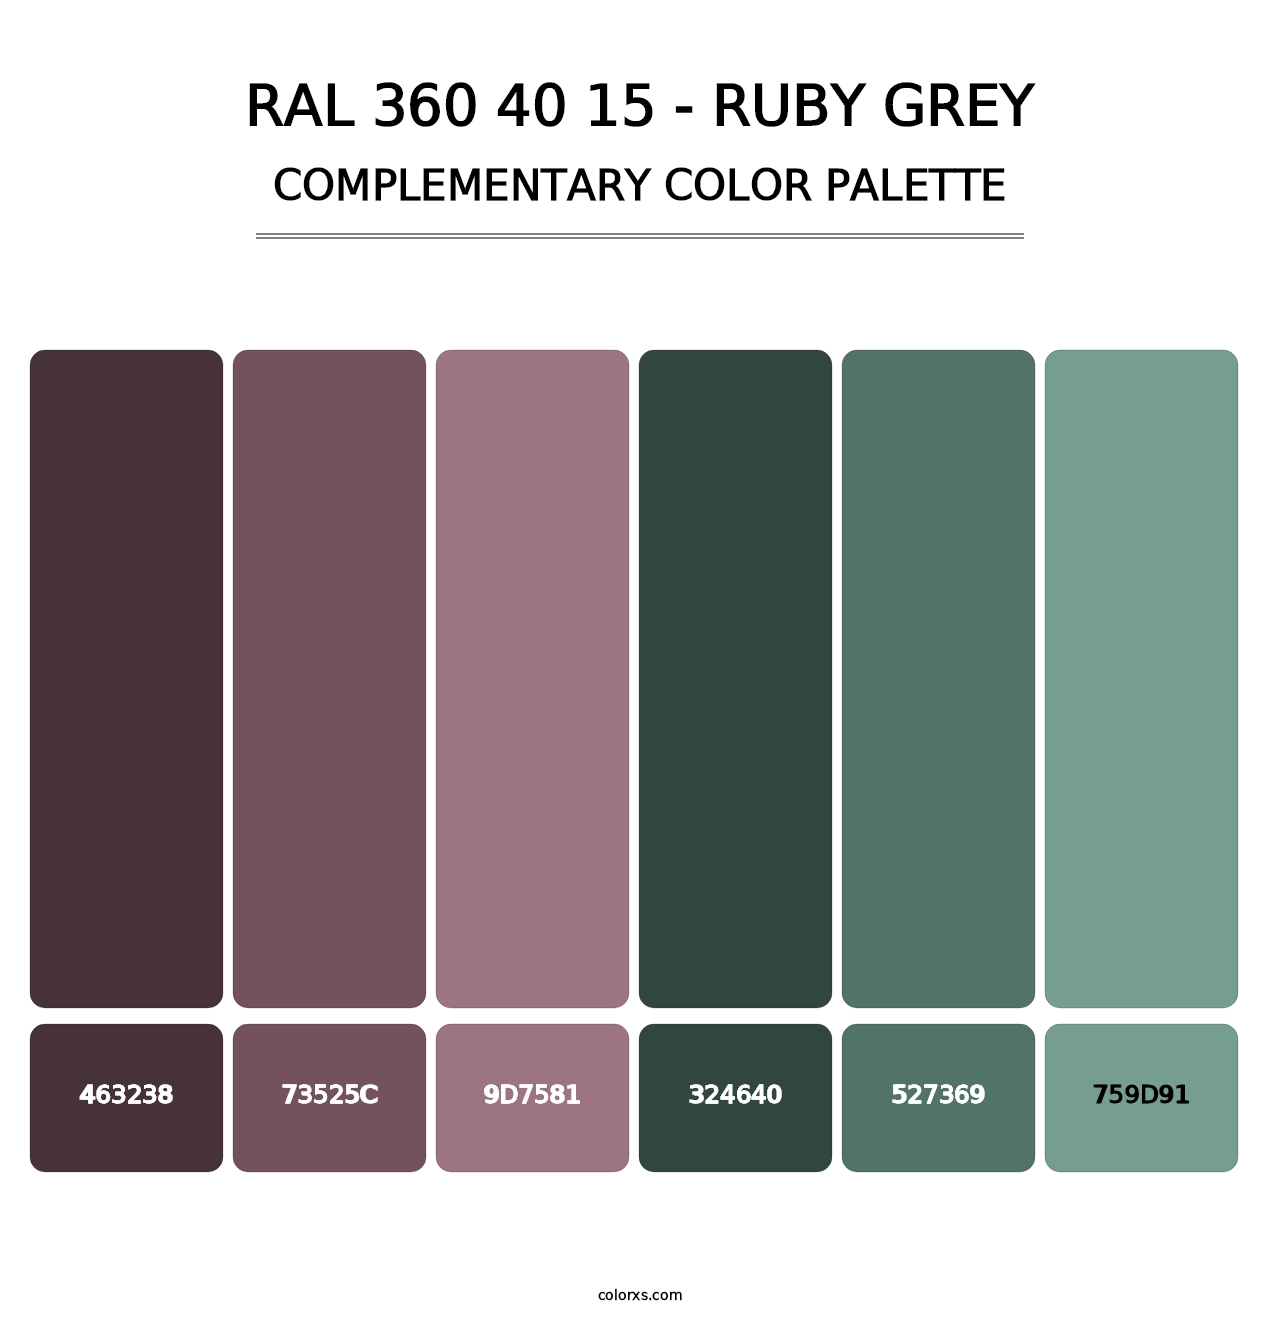 RAL 360 40 15 - Ruby Grey - Complementary Color Palette